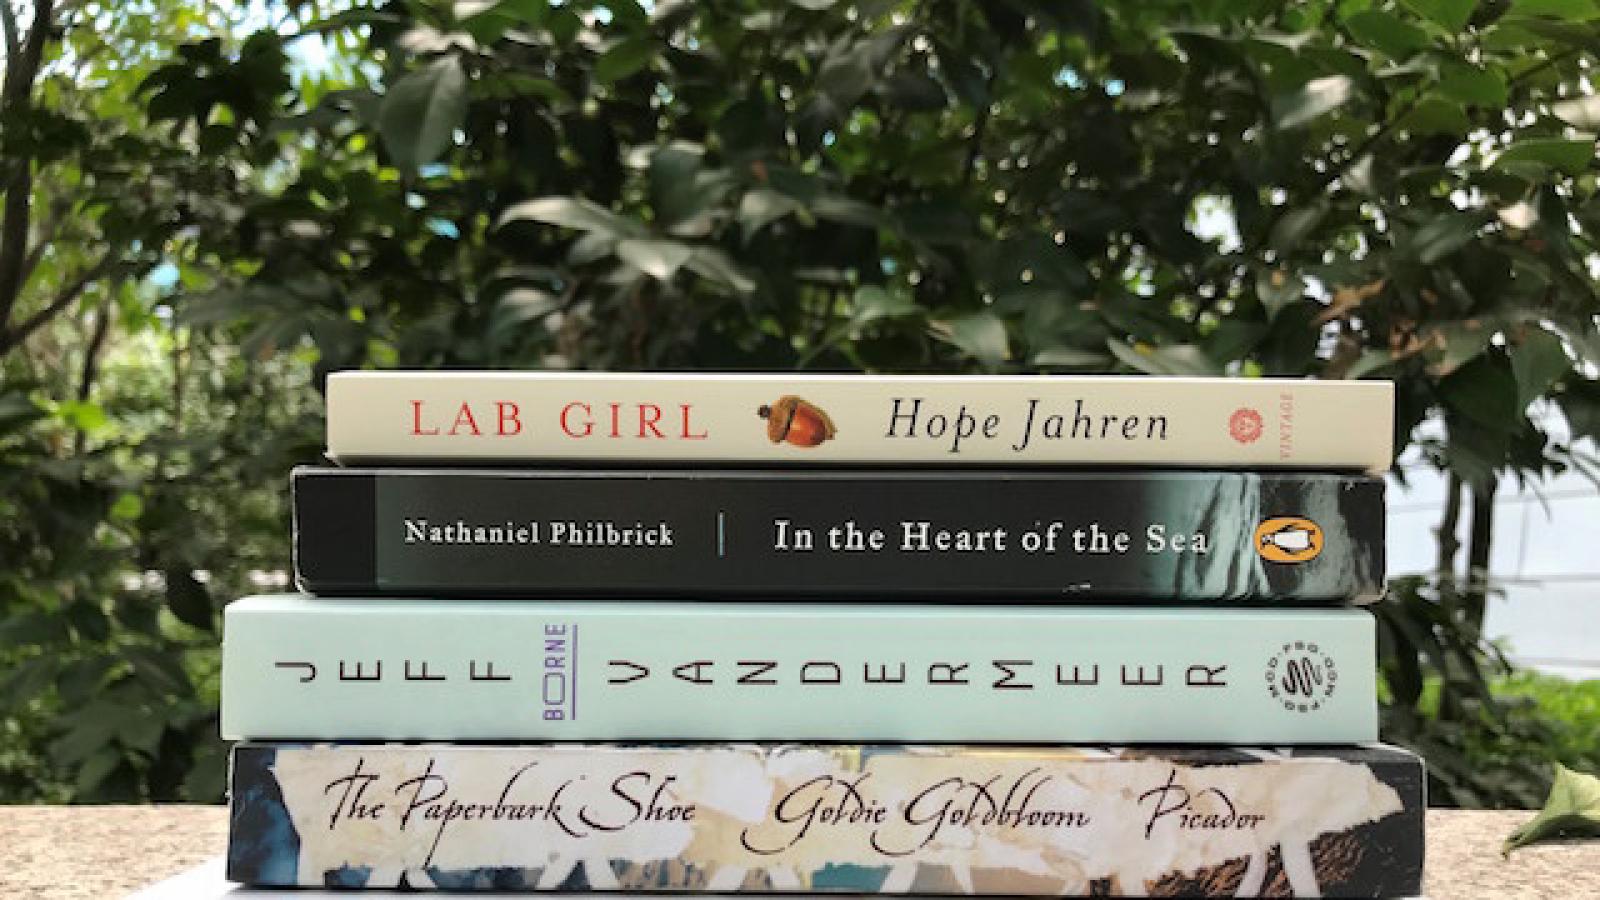 a stack of new Big Read books in a garden setting